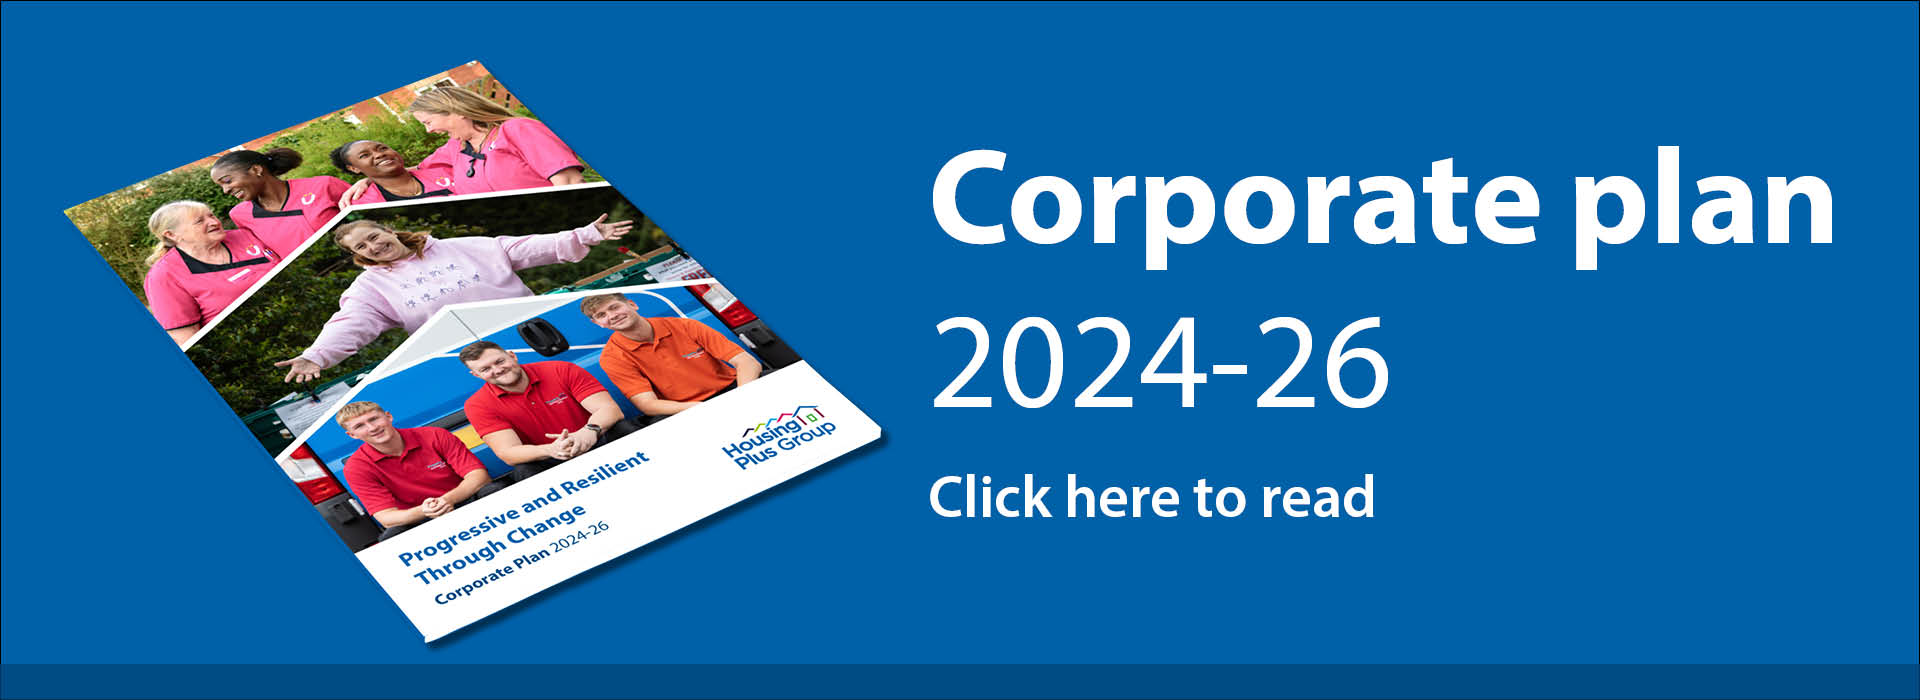 Housing Plus Group Corporate Plan 2024-26 - click here to read